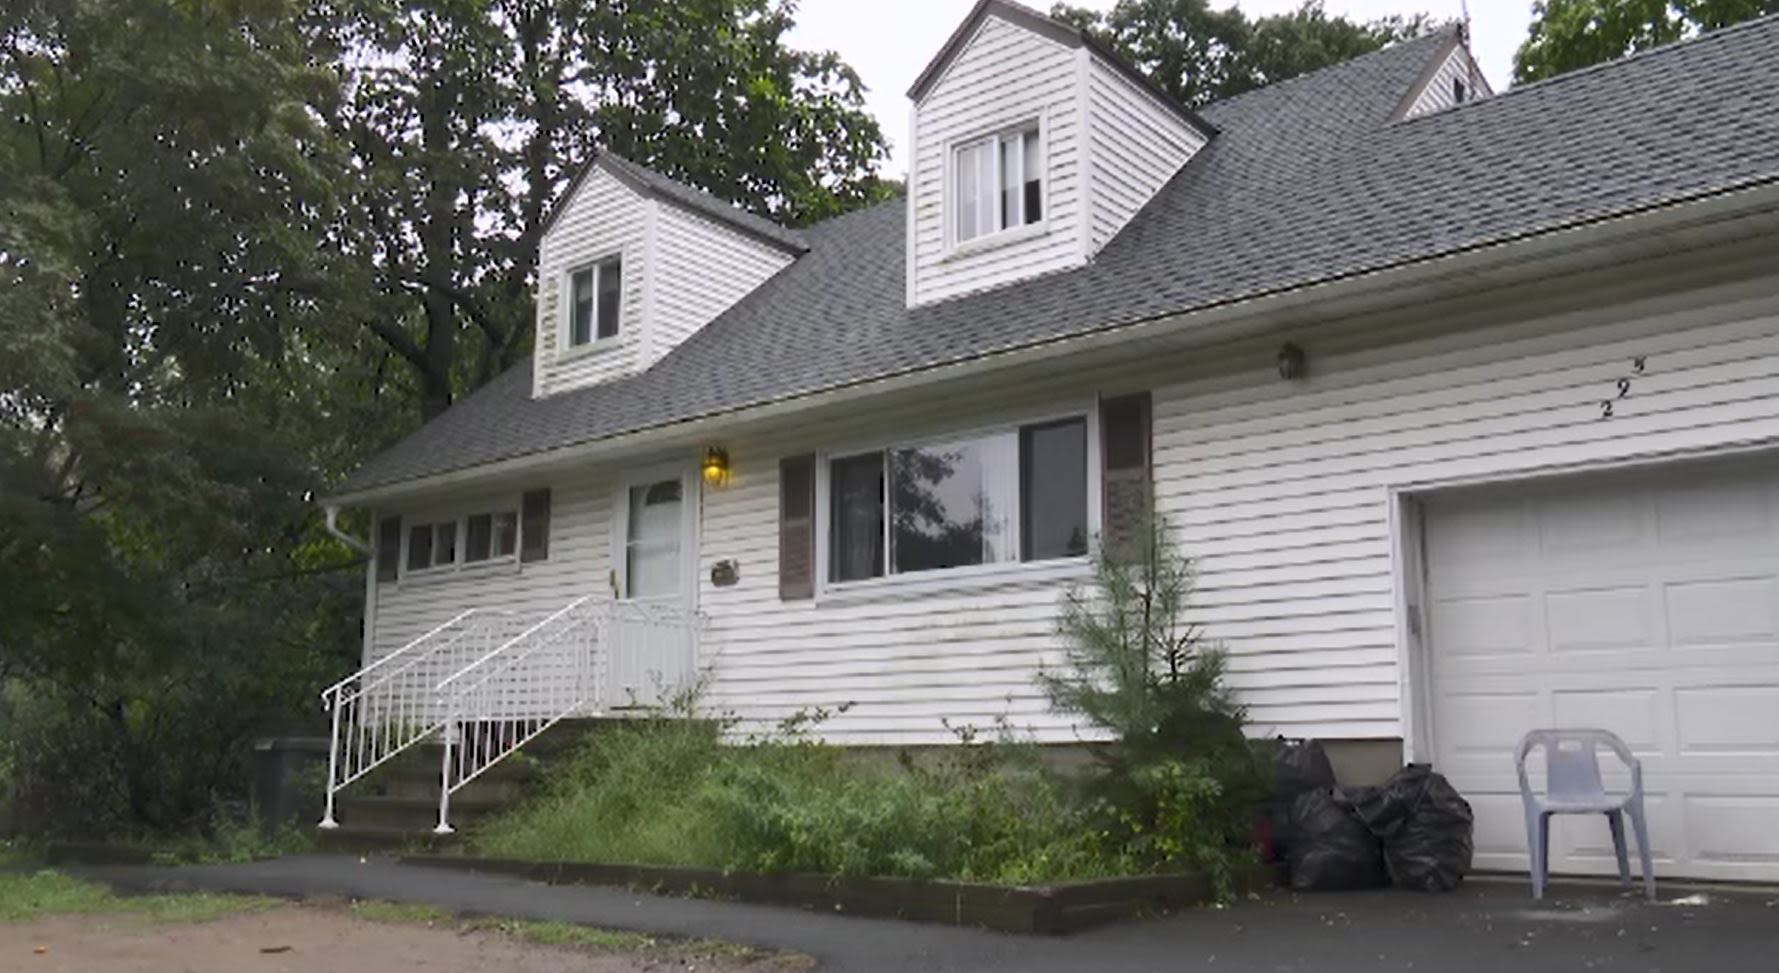 Supreme Court judge: Rockland house where over 30 migrants were living